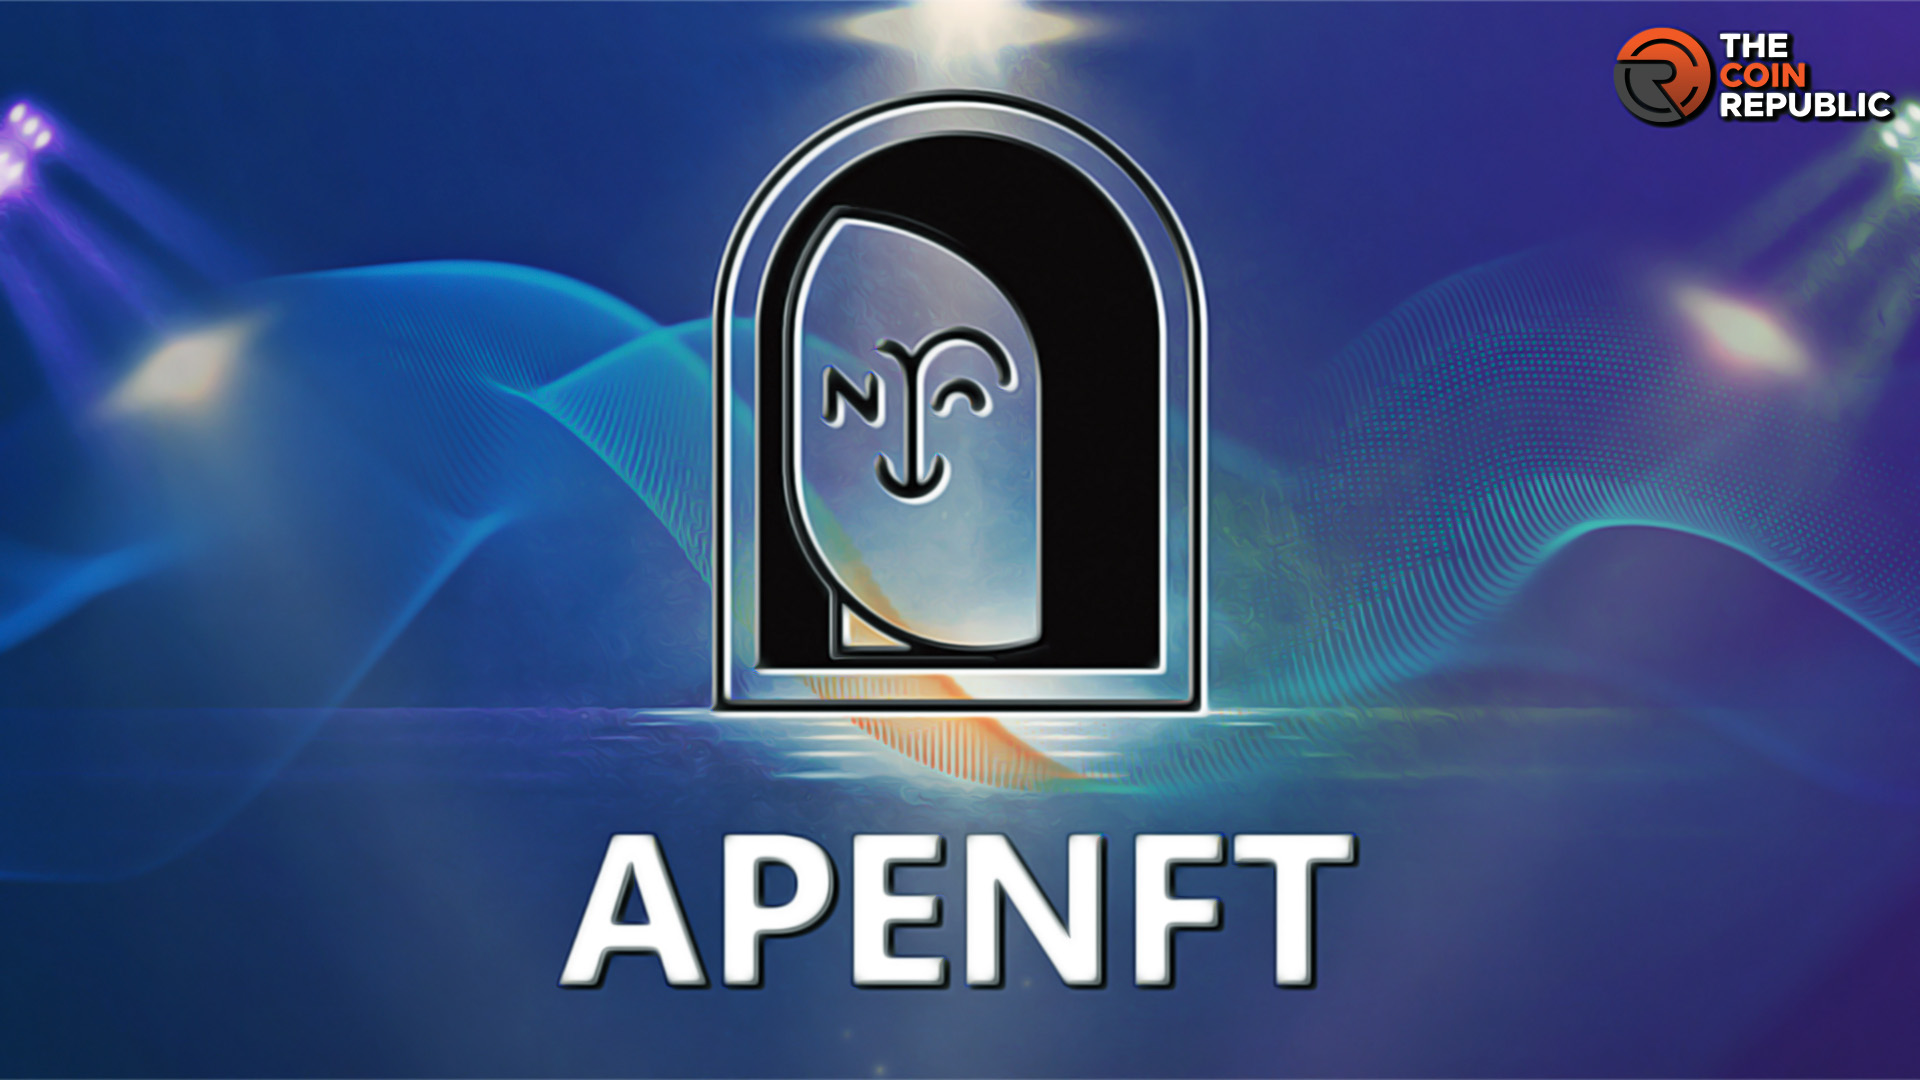 APENFT (NFT): What Is It and How It Revolutionized the NFT Space? 